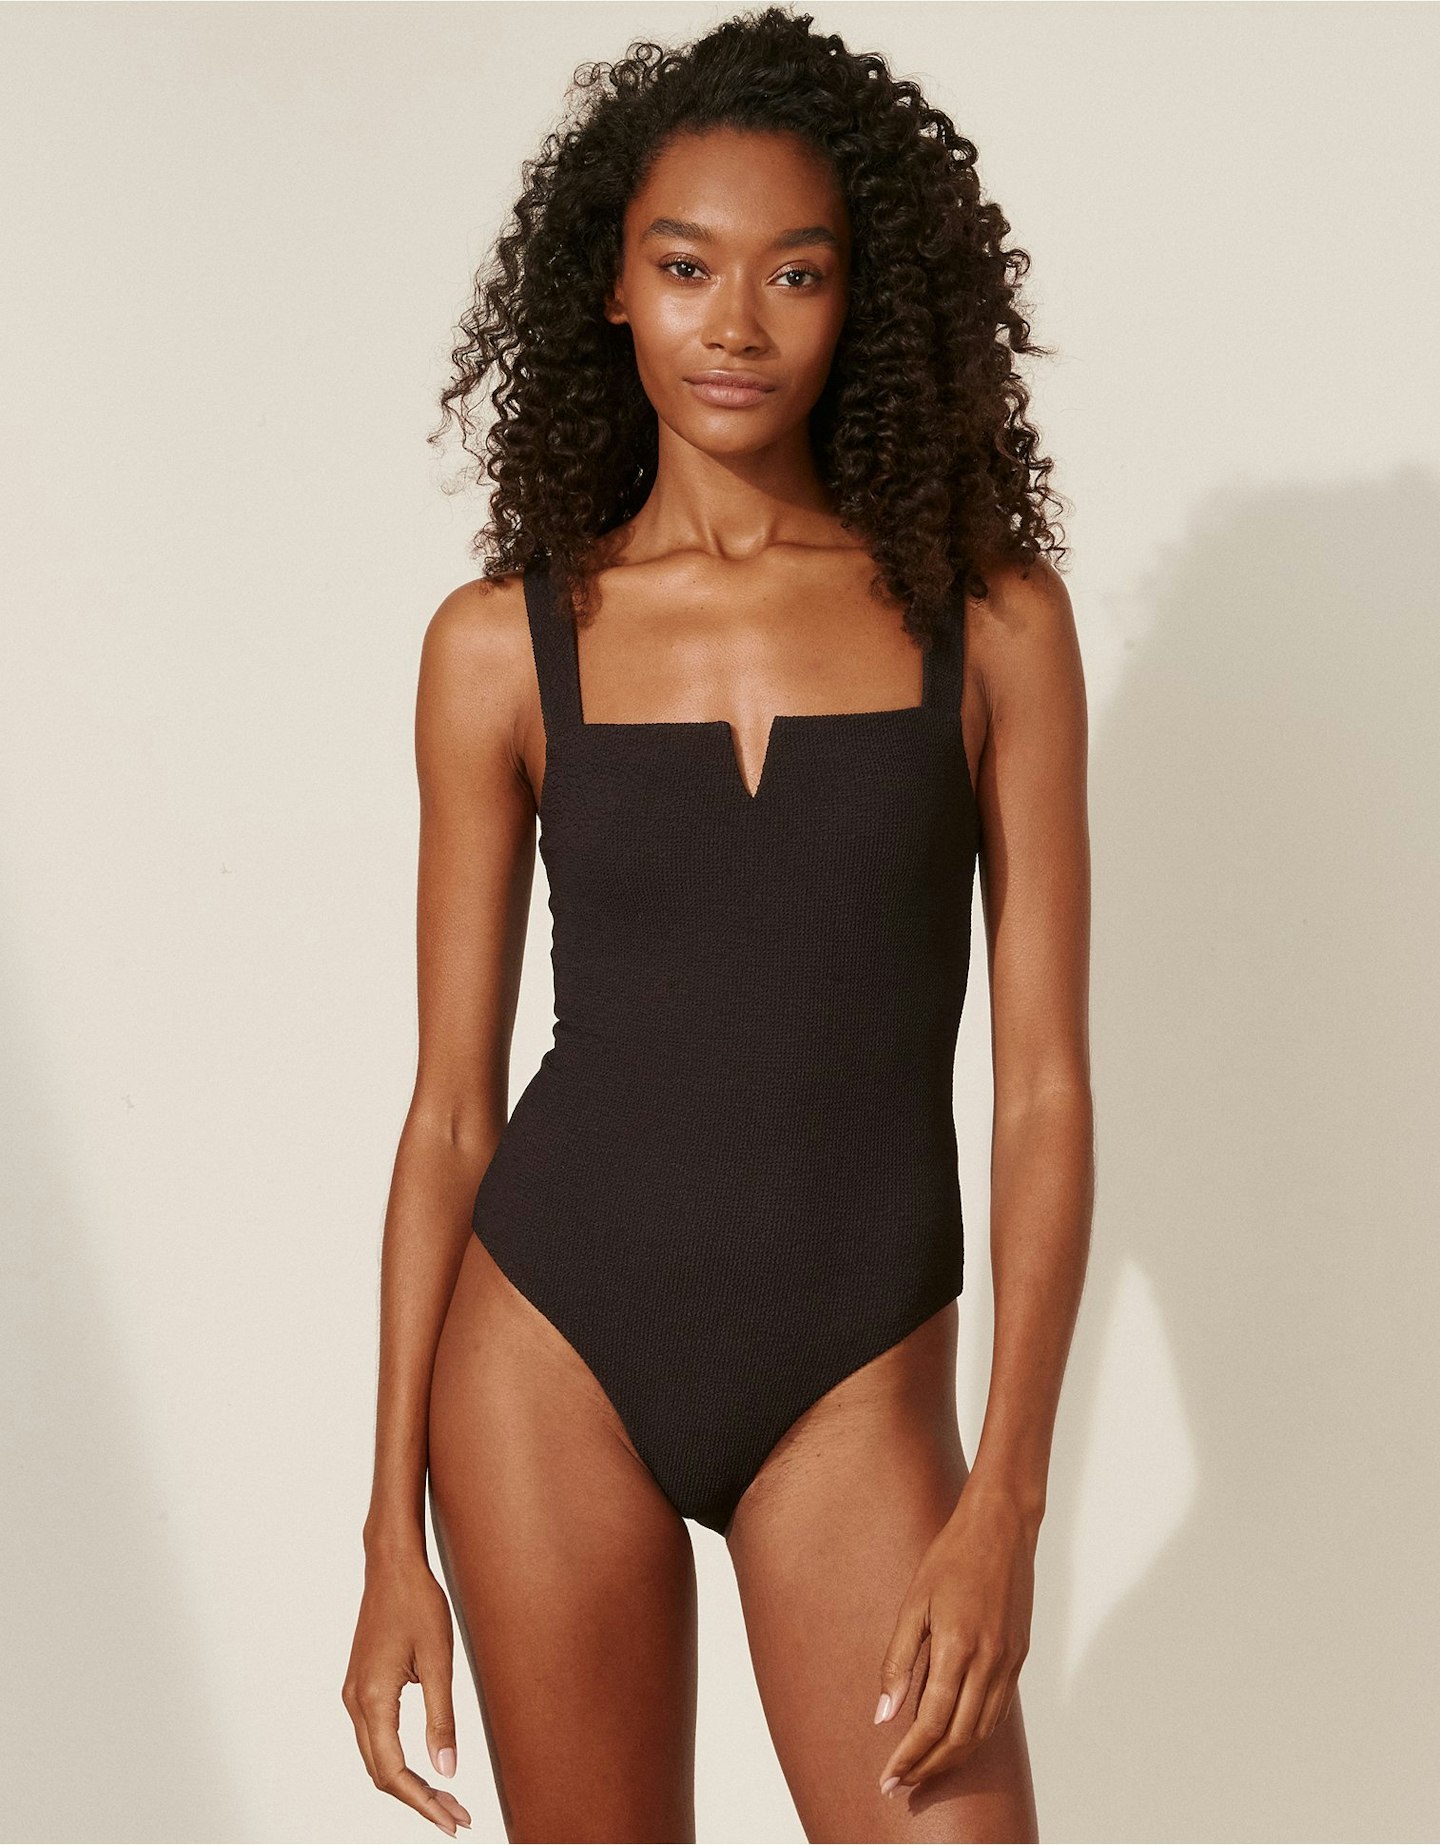 The White Company, Square-Neck Textured Swimsuit, £69